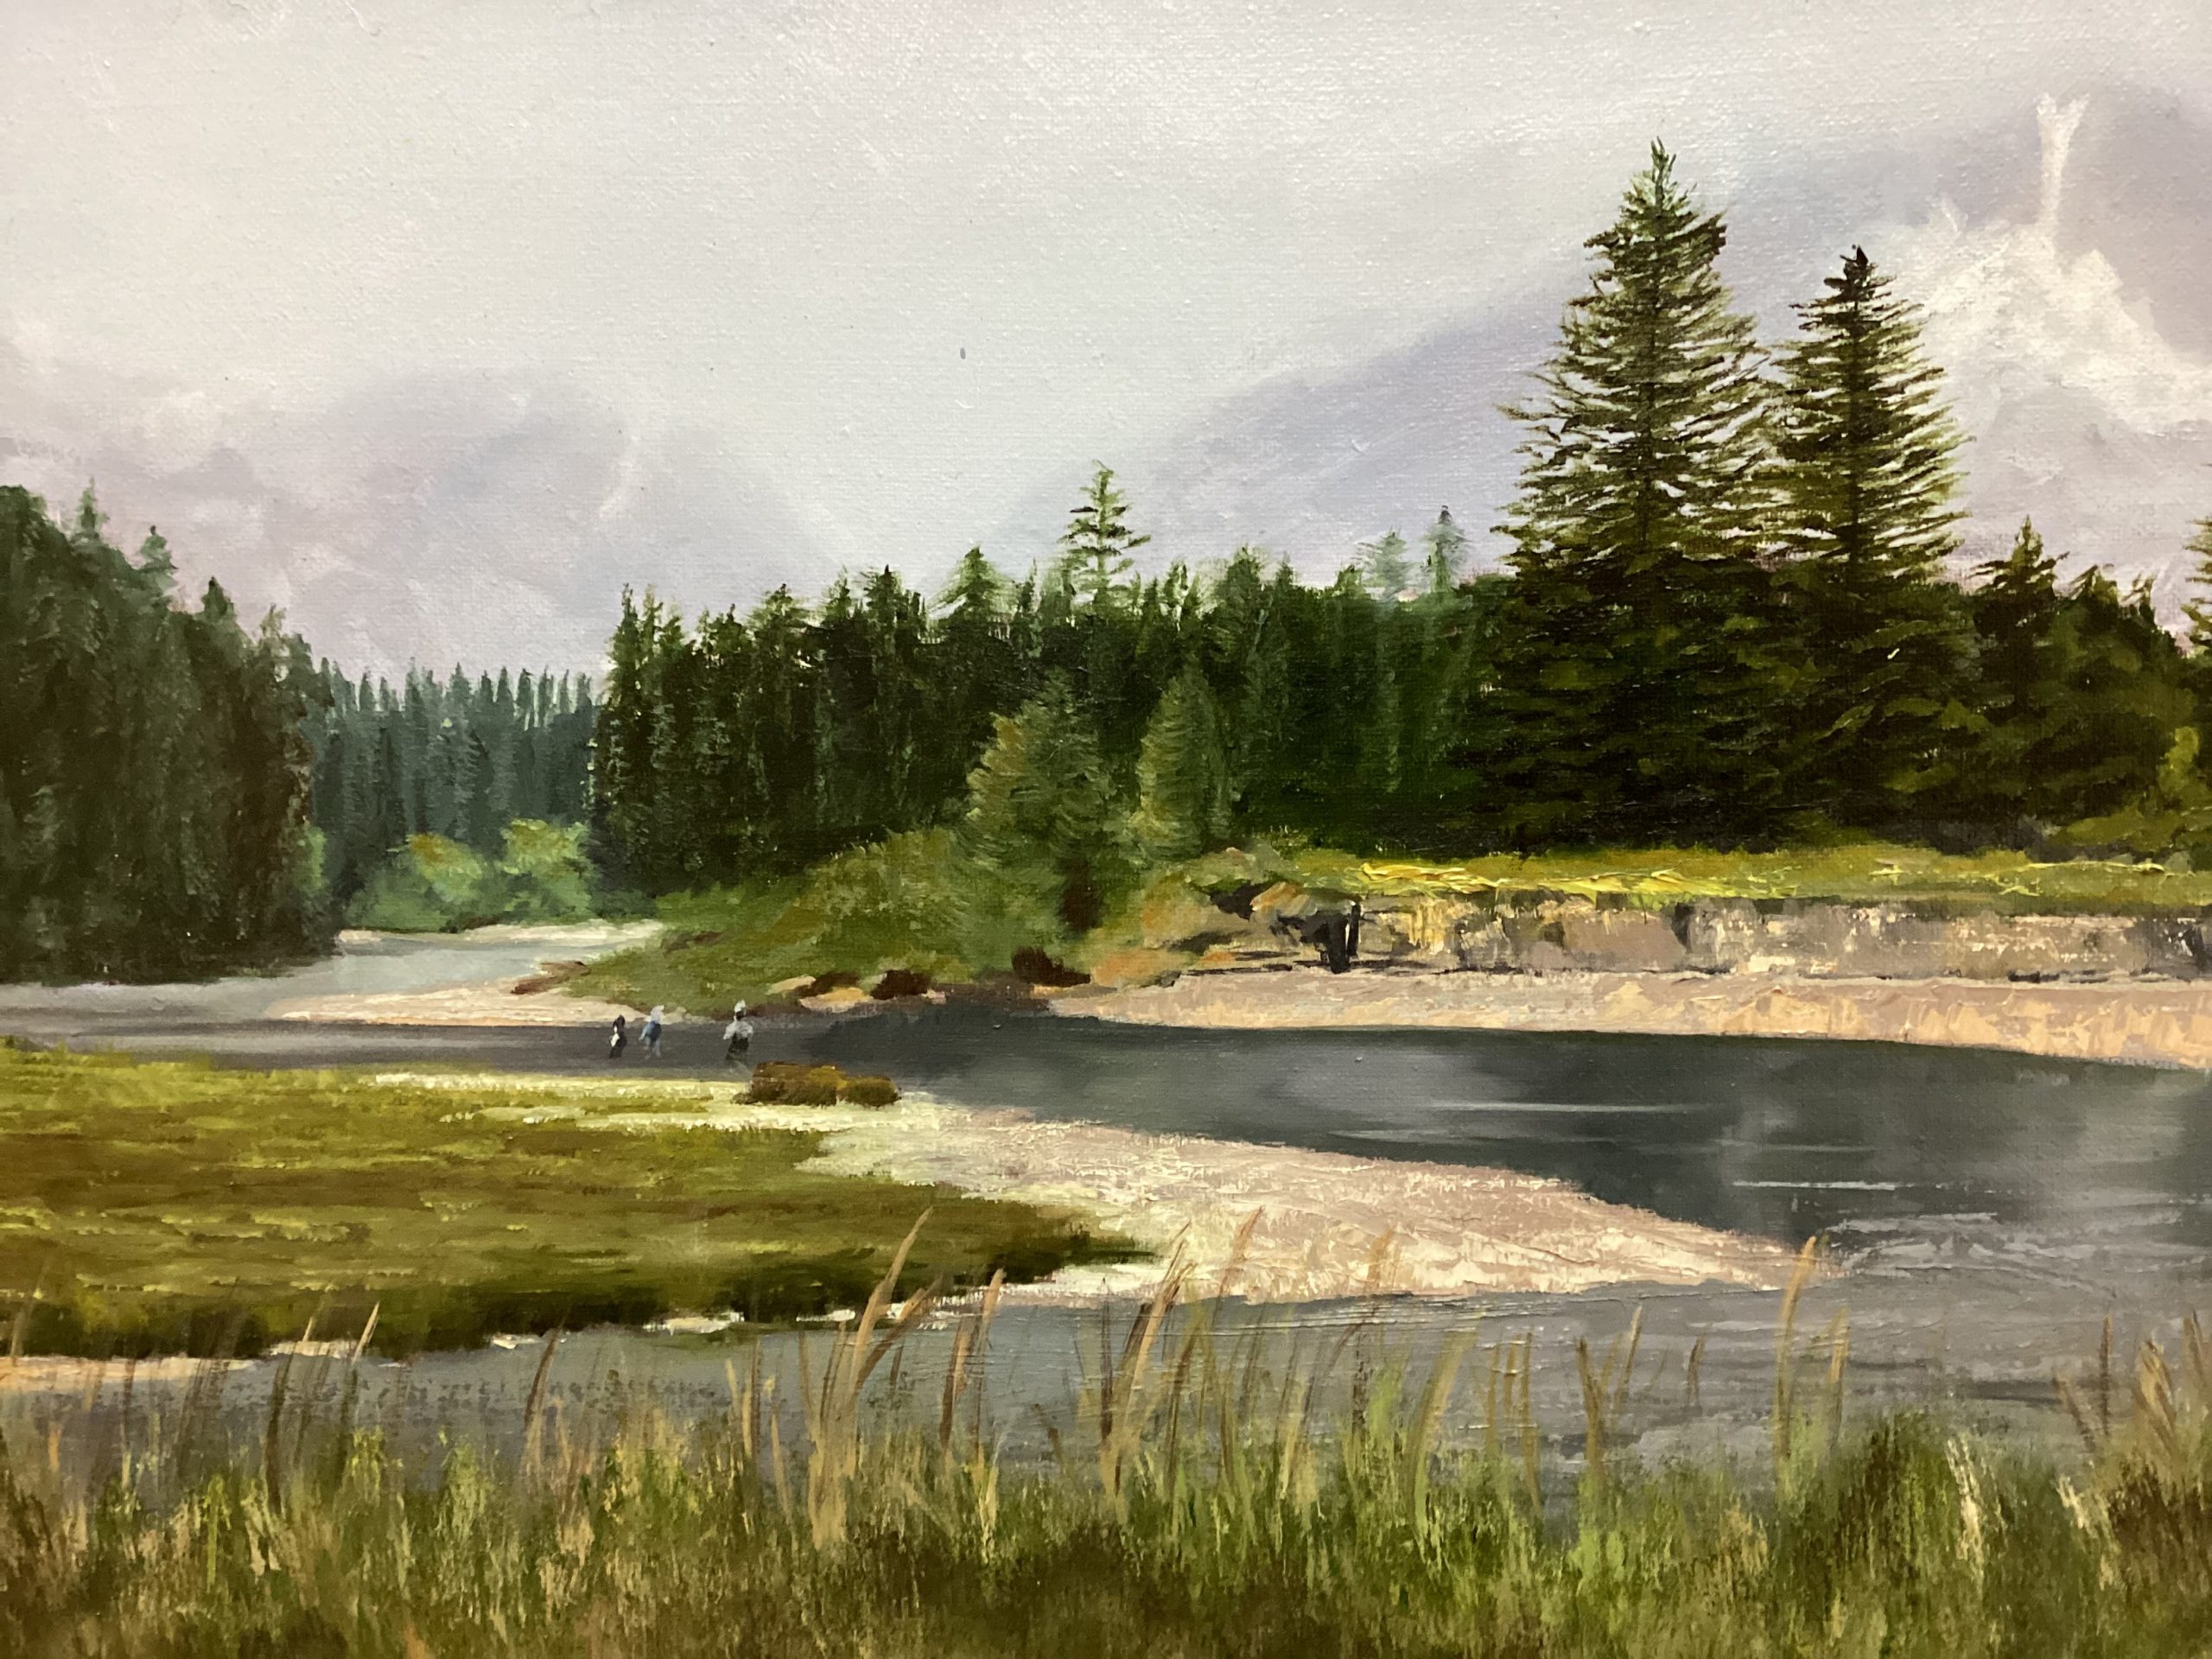 Buffalo Fork of the Snake River, Jackson Hole, Wyoming. Oil on canvas by Lisa Rice. 